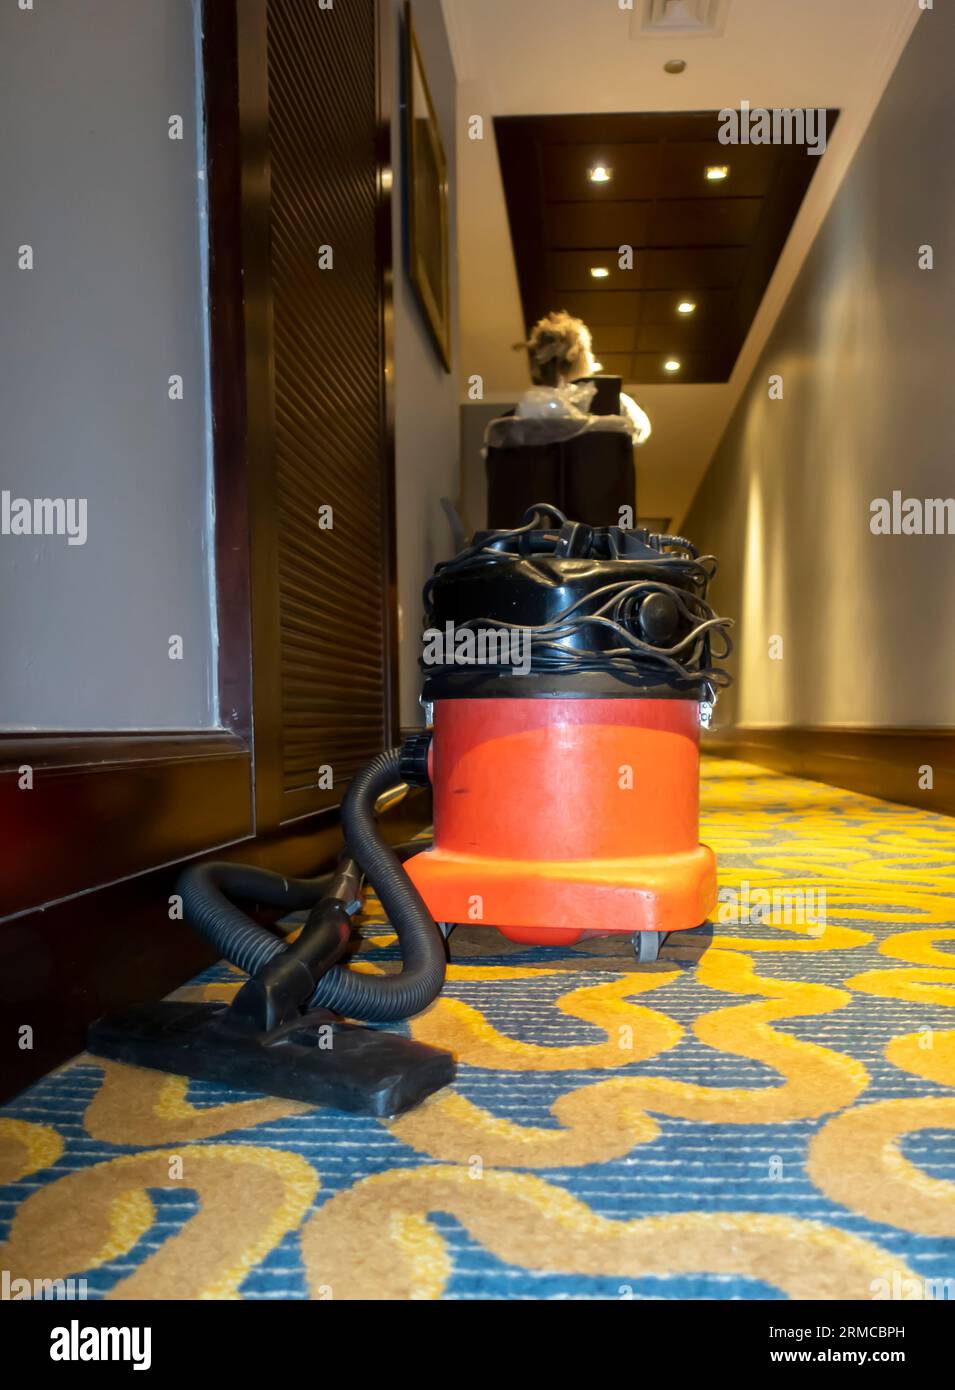 Vacuum cleaner station in a hotel corridor. Cleaning hospitality housekeeper's cleaner for carpets cleaning in hotels Stock Photo